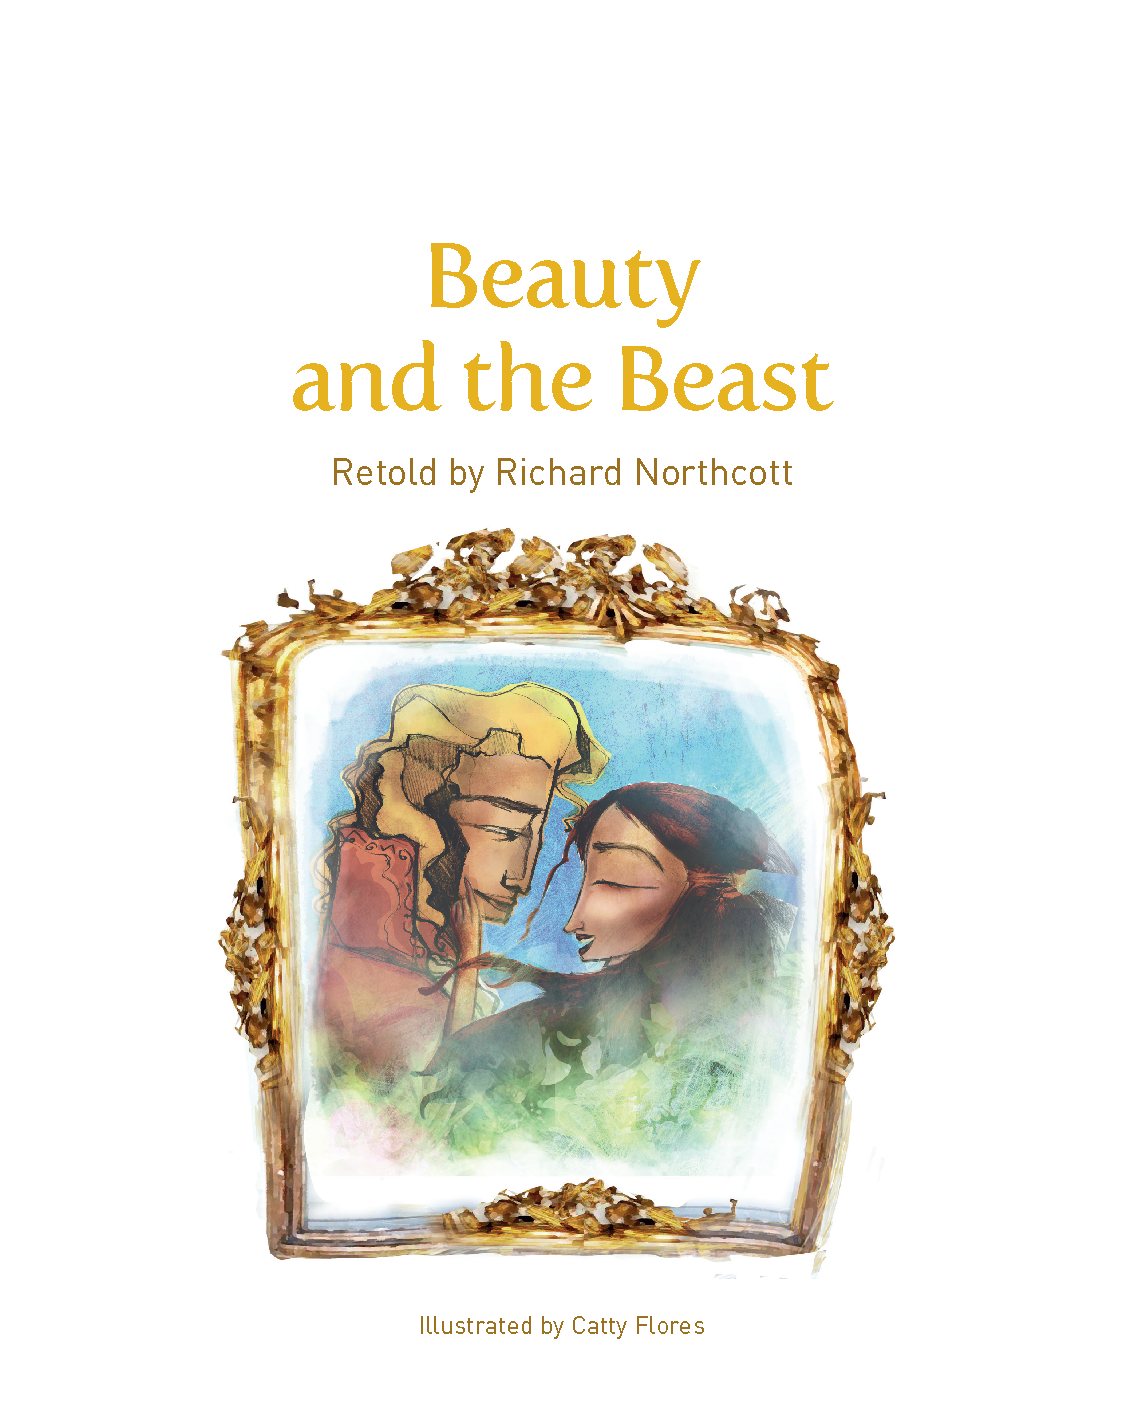 Hình ảnh Sách - Dtpbooks - Helbling Young Reader - Beauty and the Beast